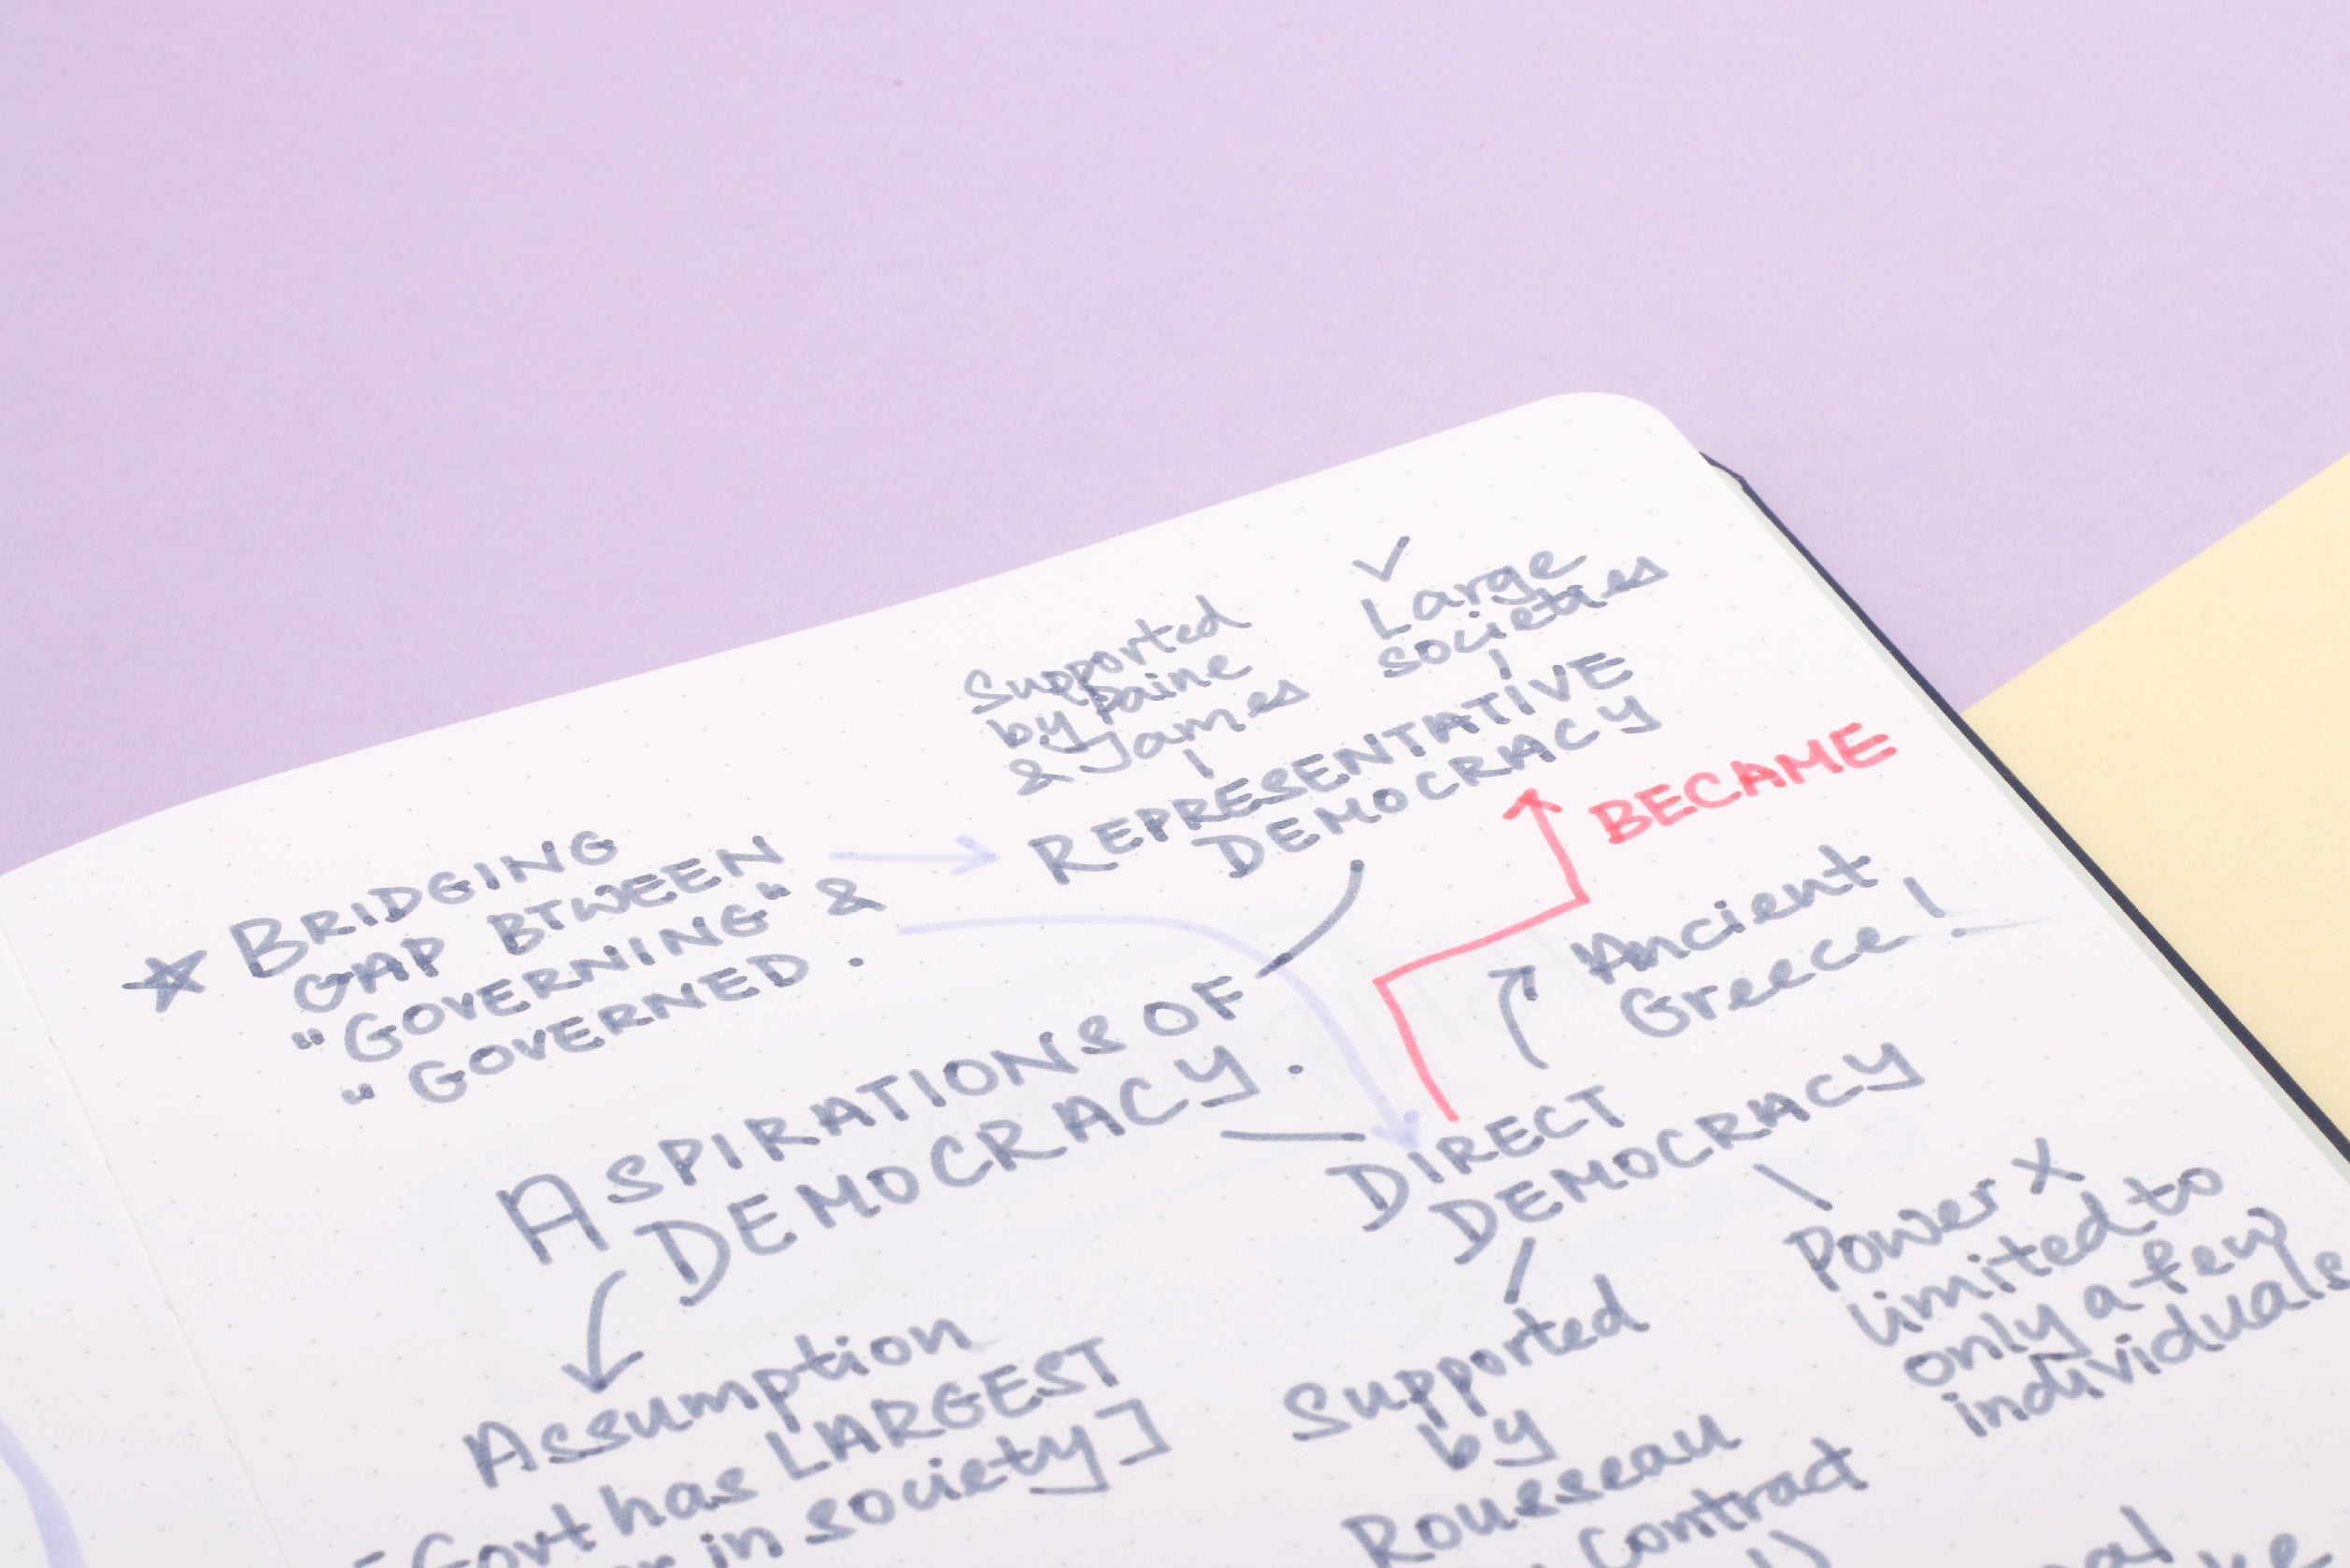 4 Effective Note-taking Methods You Should Try, Learn